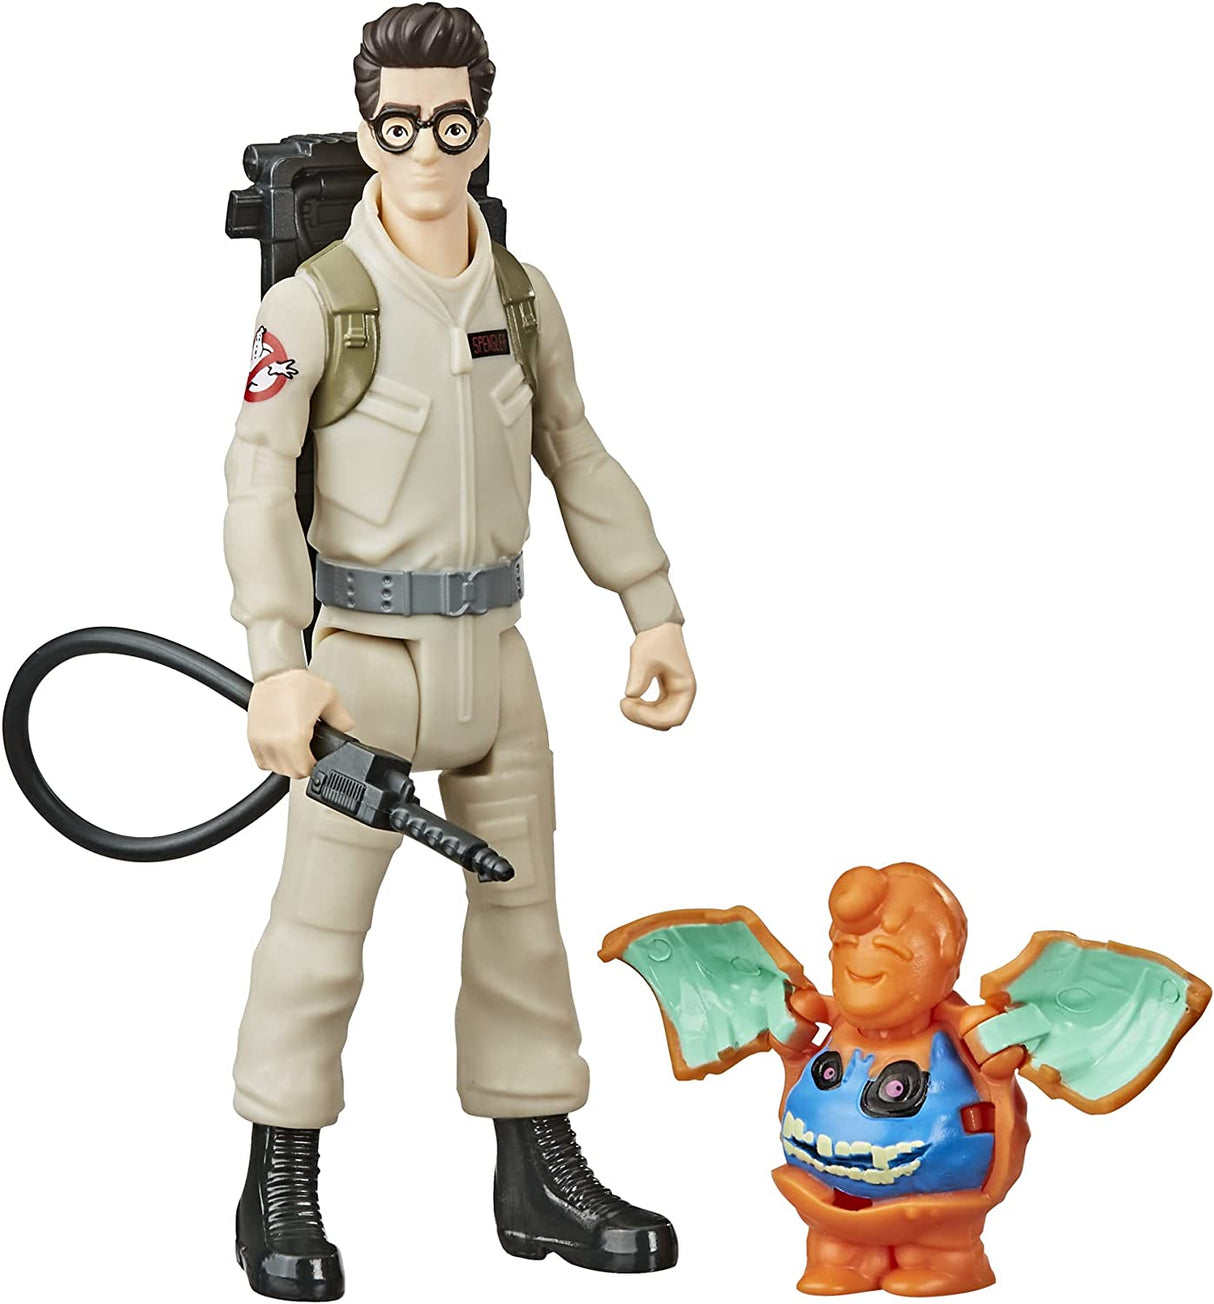 Ghostbusters Fright Features Egon Spengler Figure and Interactive Ghost (6904511004772)